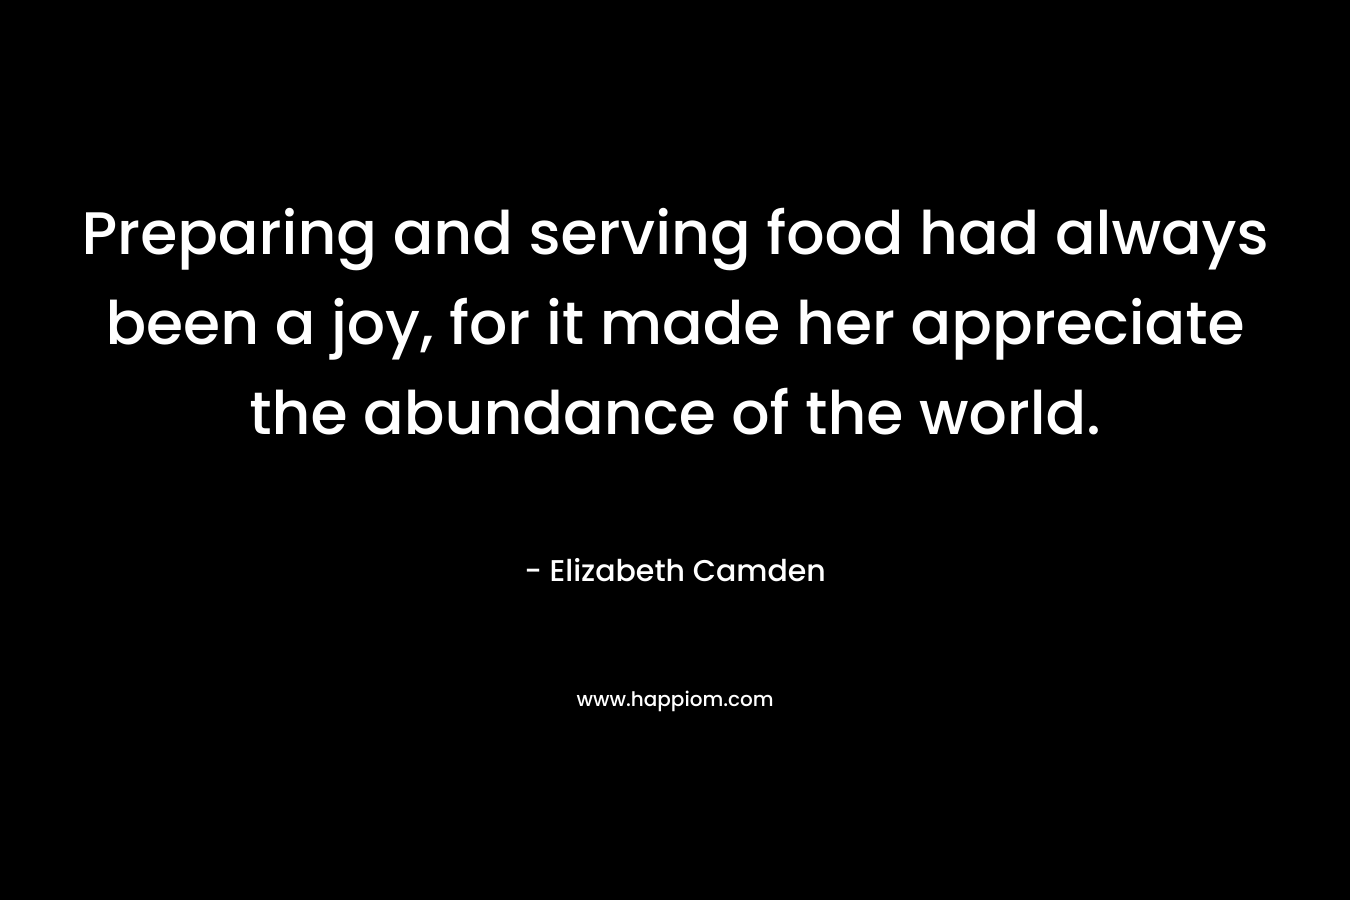 Preparing and serving food had always been a joy, for it made her appreciate the abundance of the world. – Elizabeth Camden